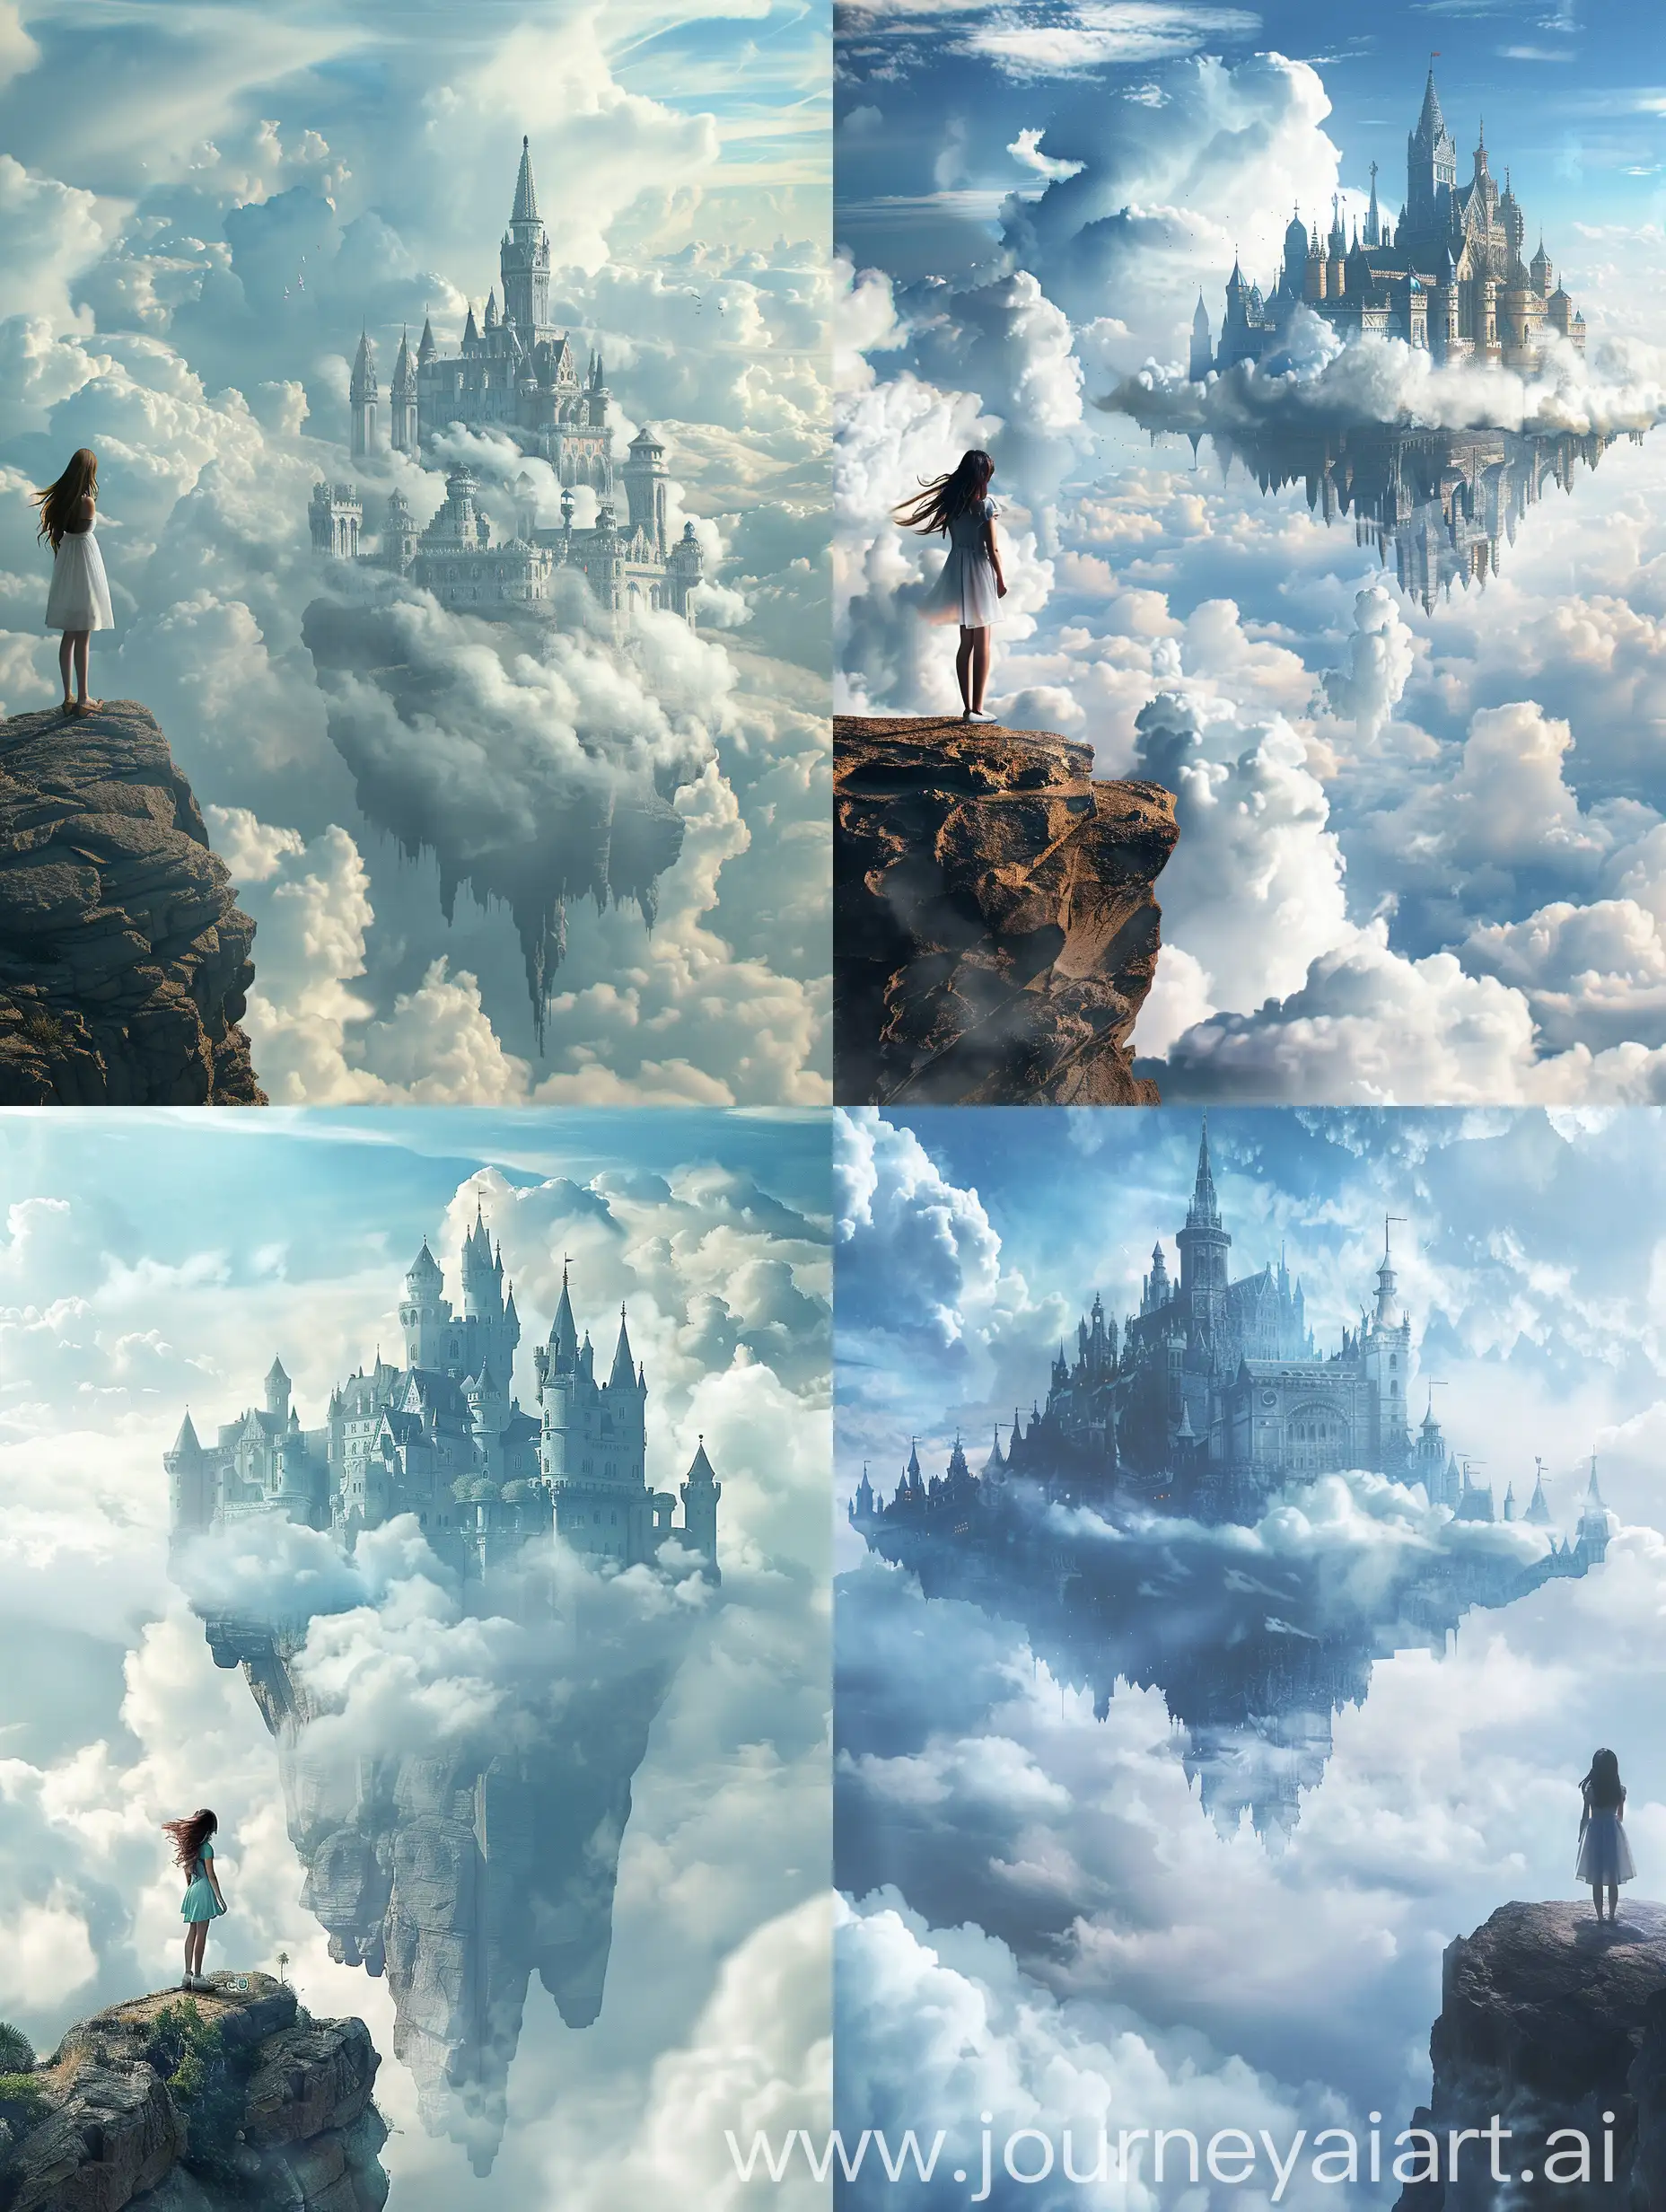 Woman-Standing-on-Cliff-with-Floating-Cloud-Castle-in-Breathtaking-Fantasy-Art